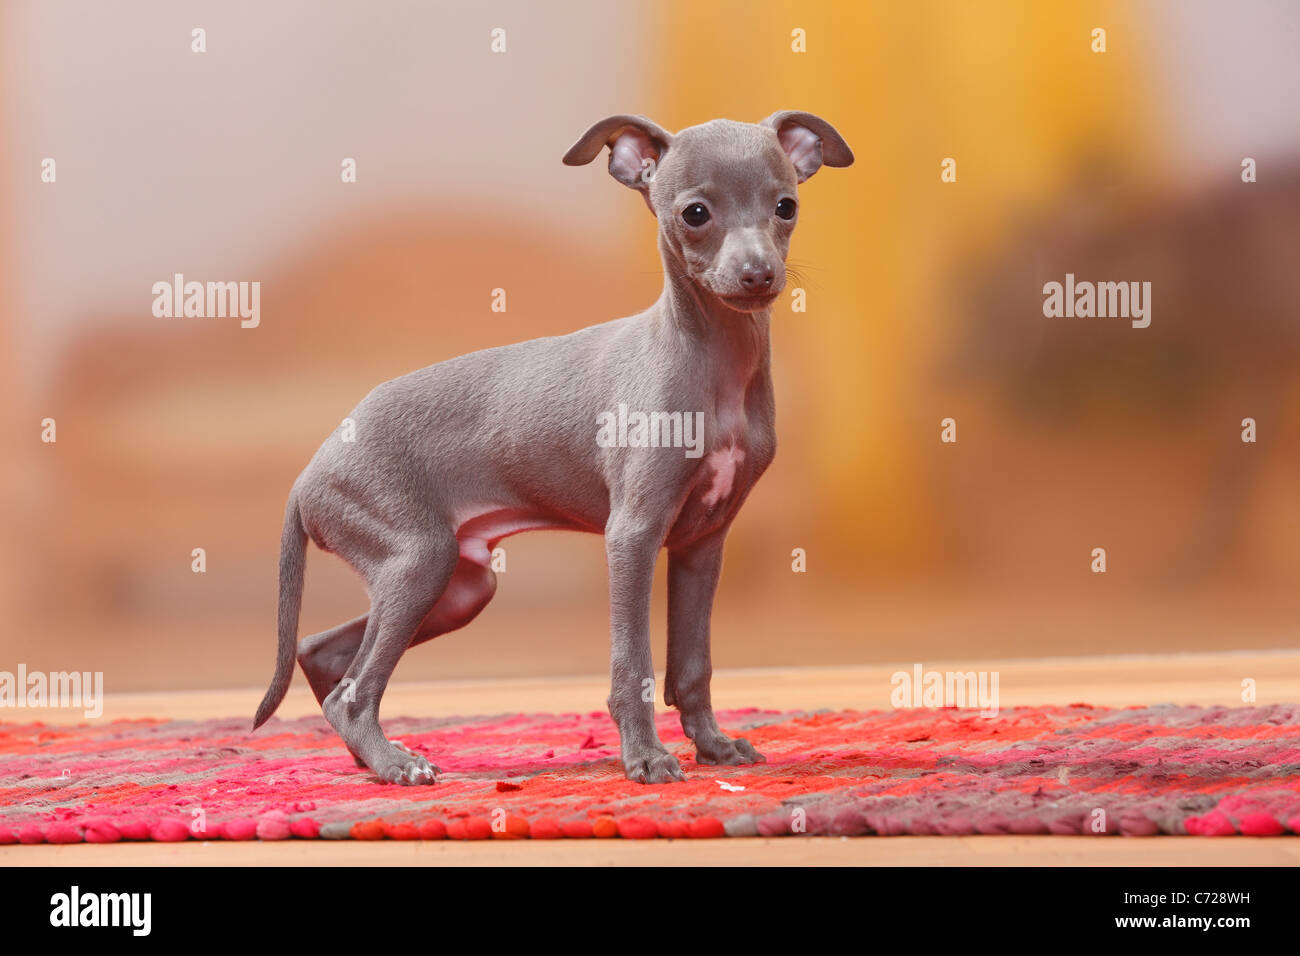 Italian Greyhound Puppy High Resolution Stock Photography and Images - Alamy